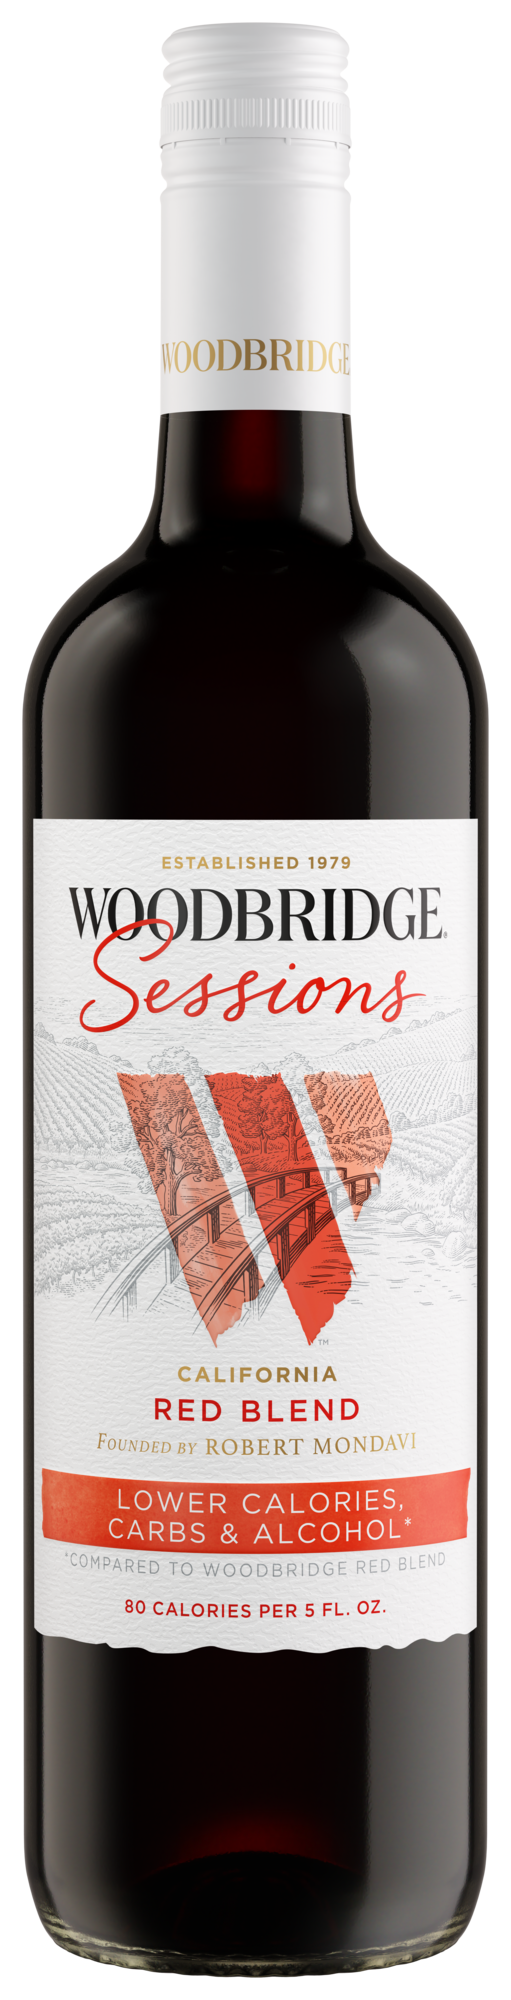 Woodbridge sessions Red blend Low Calories & Carb